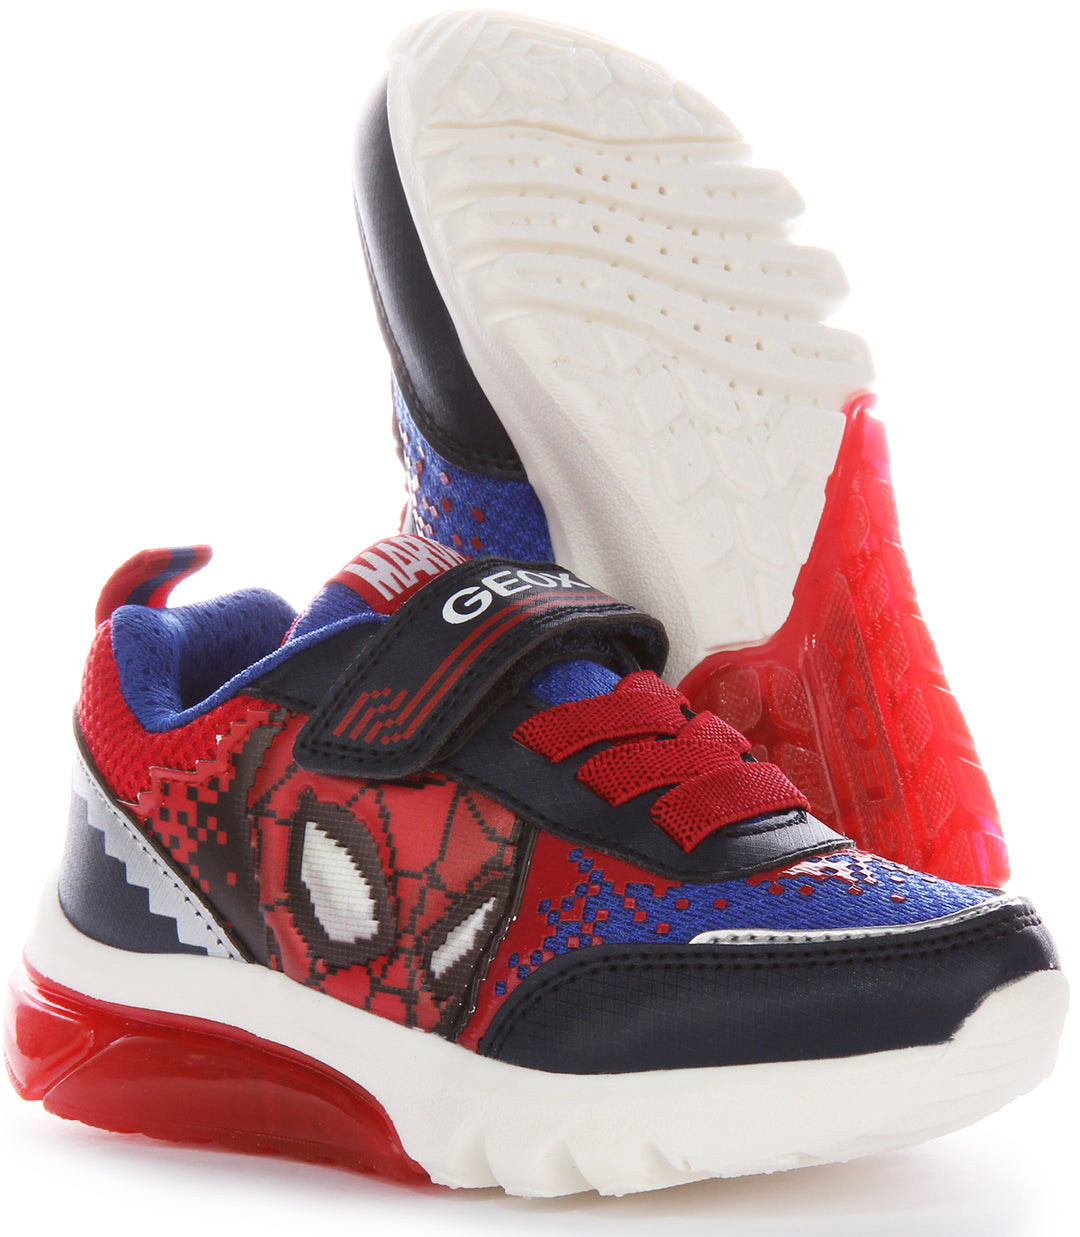 Geox J Ciberdrone Spiderman Pixel In Navy Red For Infants